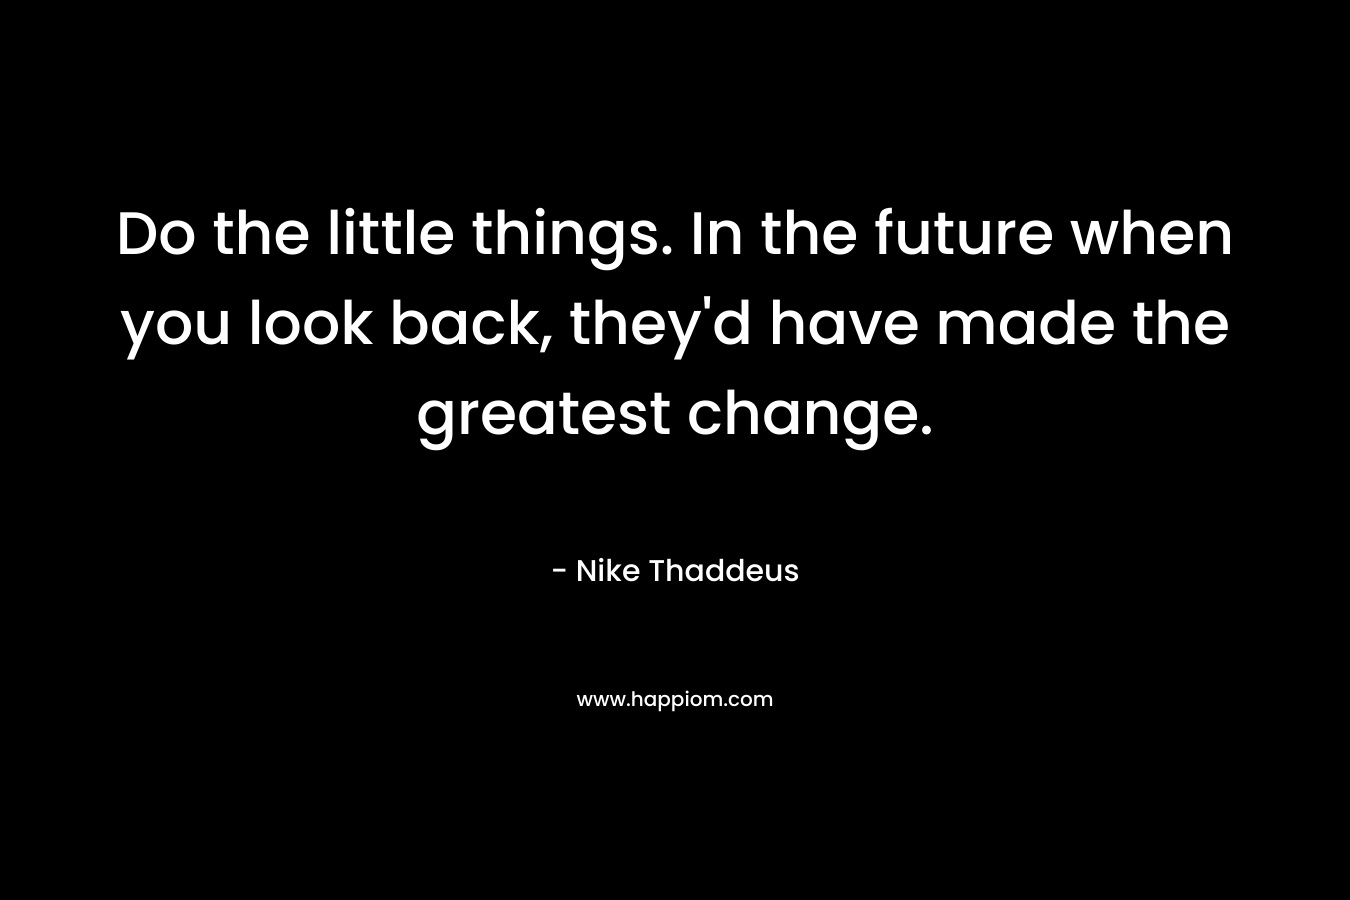 Do the little things. In the future when you look back, they'd have made the greatest change.